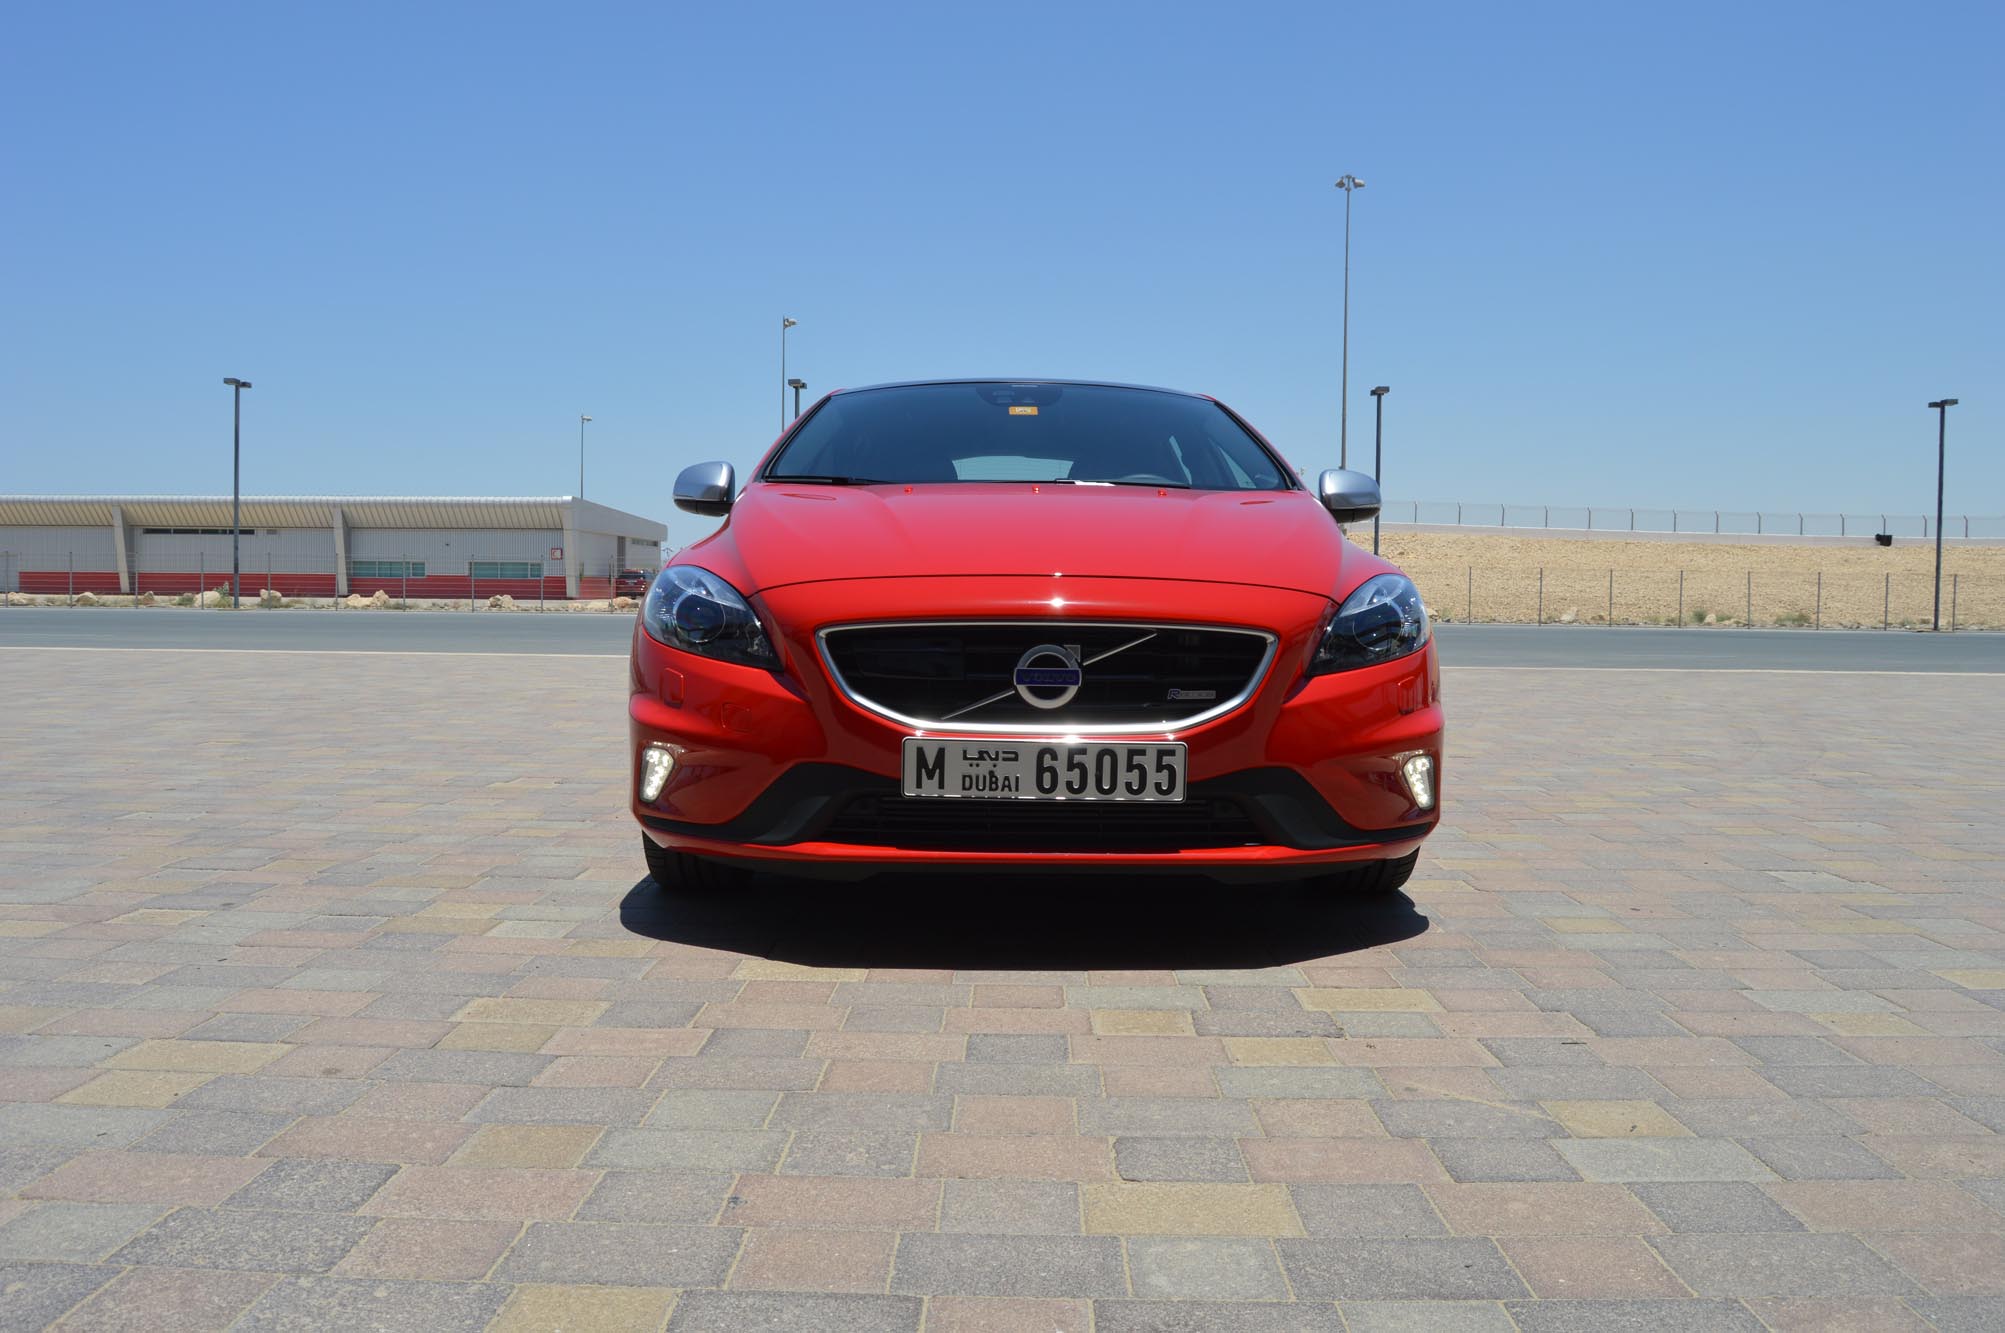 Volvo V40 Review: Smooth concoction